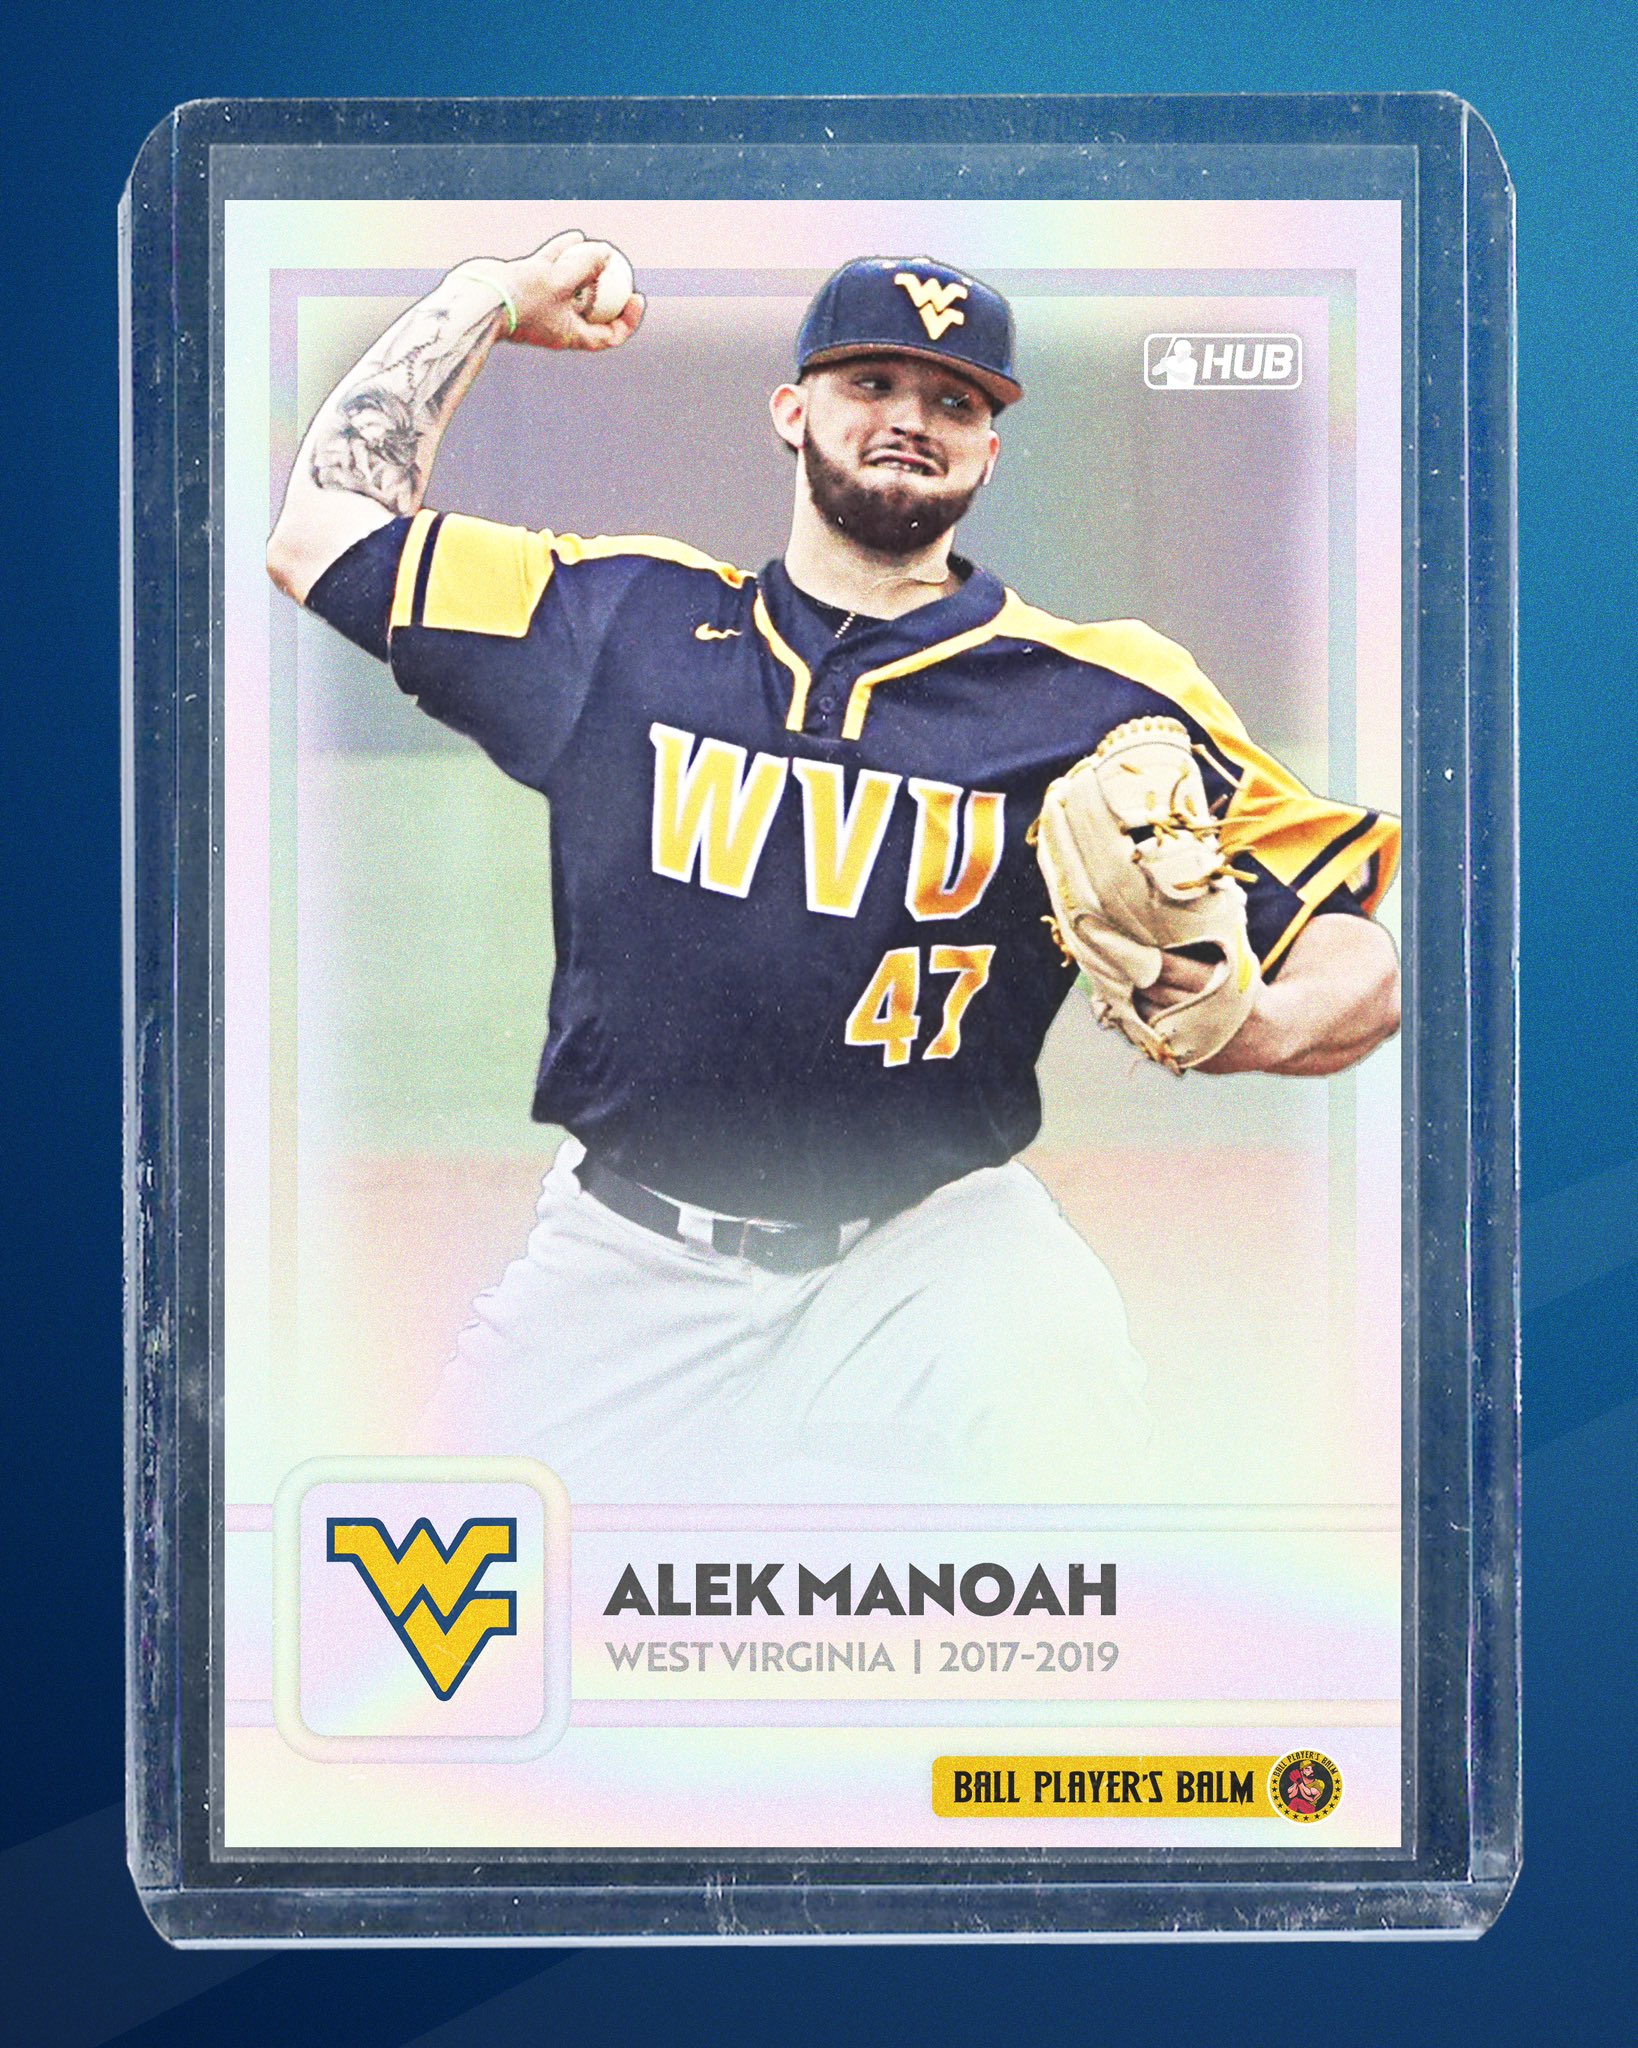 WVU Baseball on X: RT @CollegeBSBHub: #MLBMonday is Alek Manoah! He played  for @WVUBaseball from 2017-2019. Check out his college stats 👀   / X